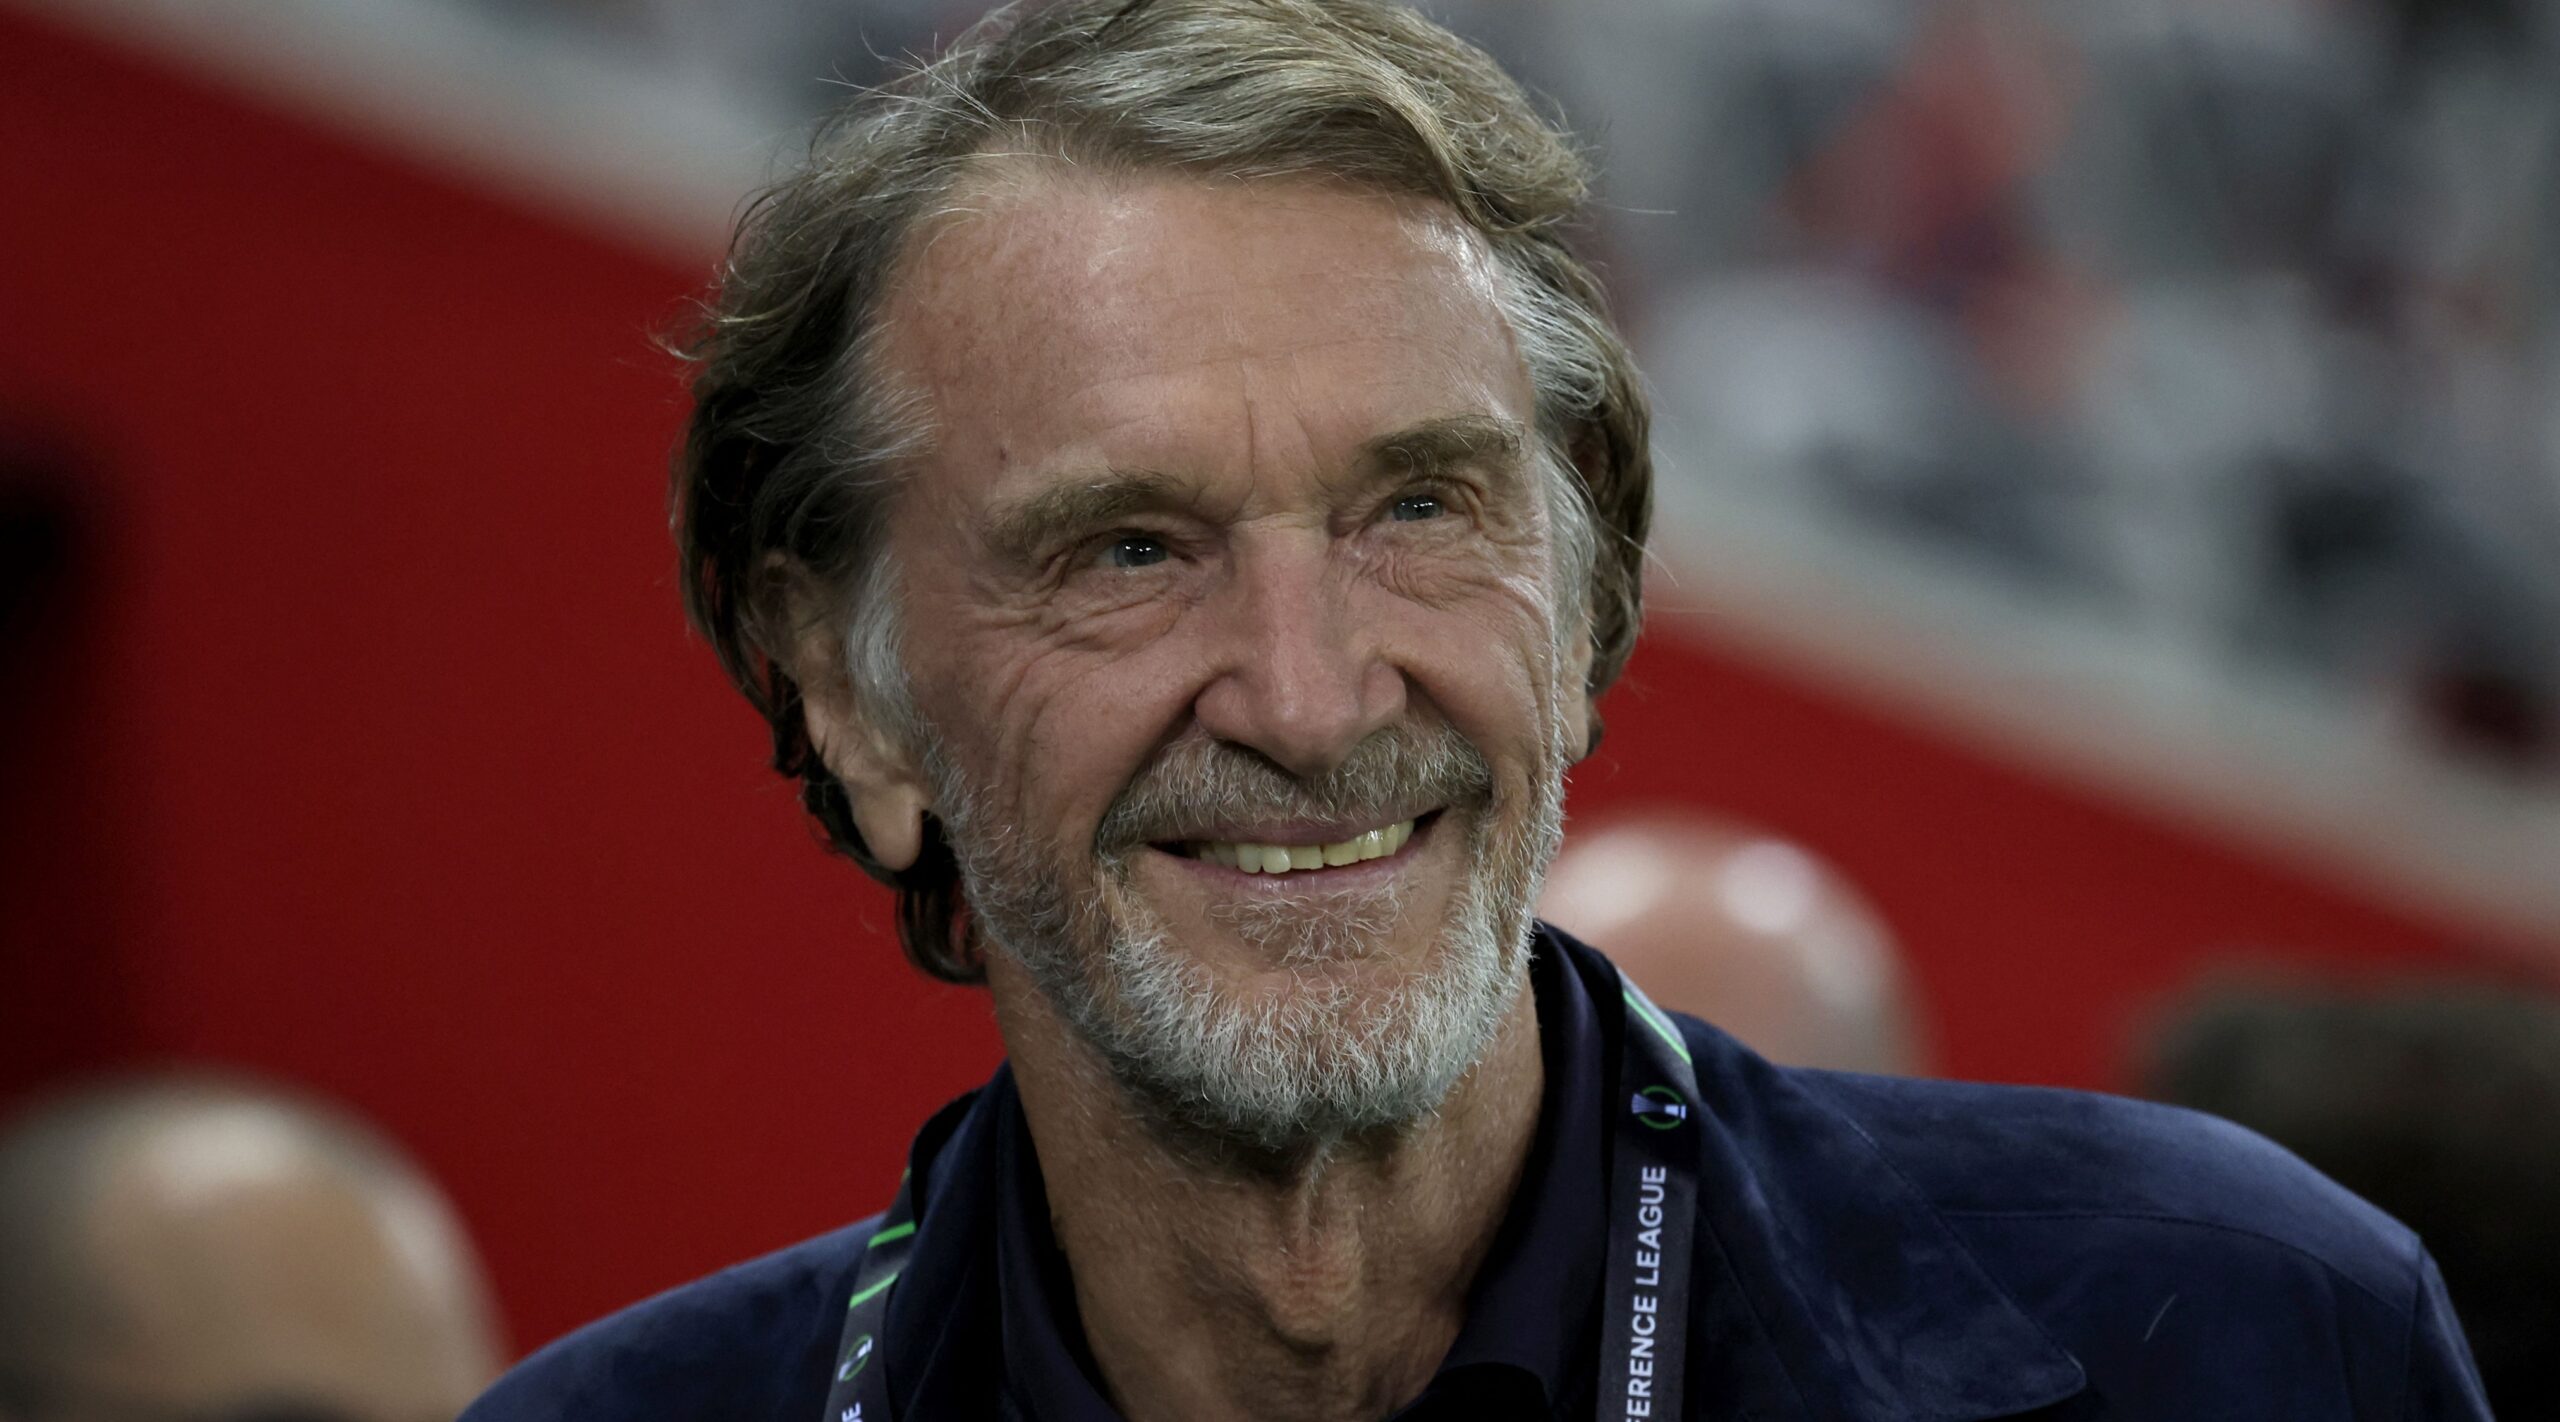 Sir Jim Ratcliffe says Manchester United takeover failure would be 'EXCRUCIATING'